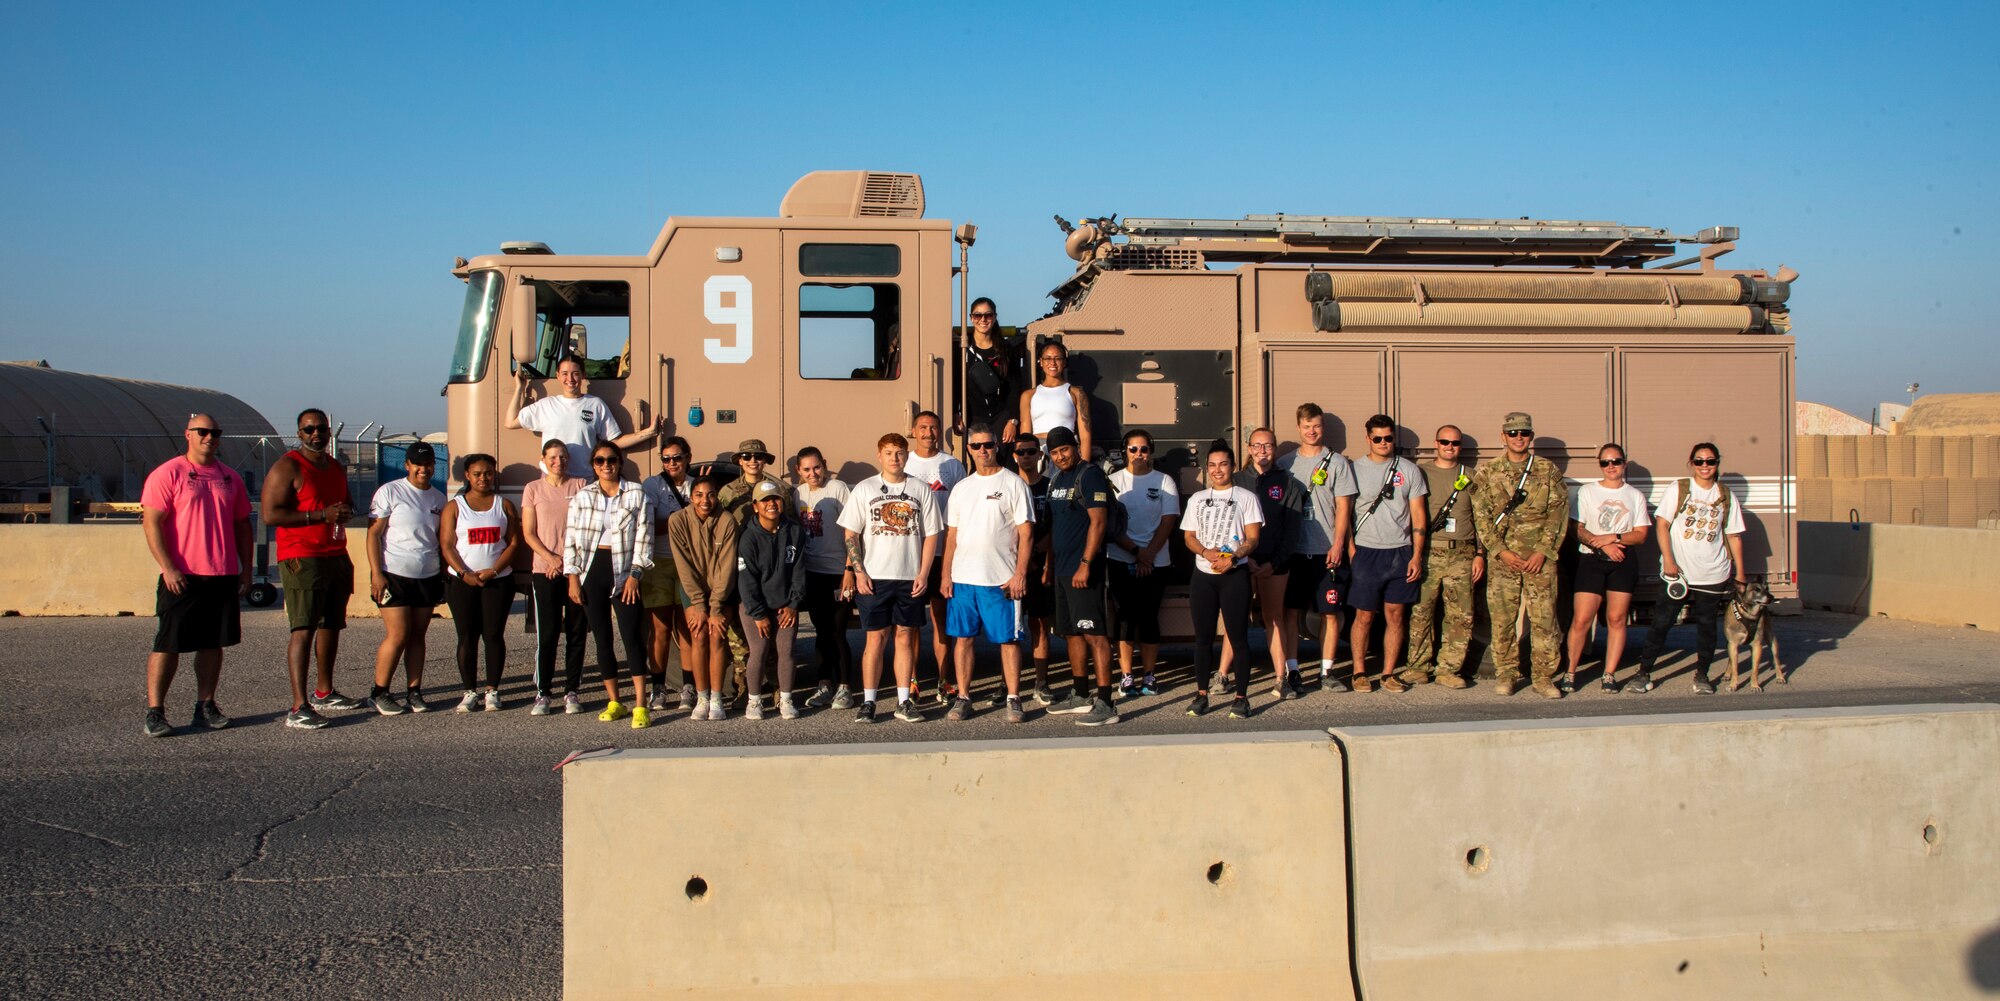 Airmen with the 332d Aerial Expeditionary Wing participate in a five kilometer run, brunch and barbecue dinner in honor of Women's Equality Day at an undisclosed location in Southwest Asia, August 26, 2022.